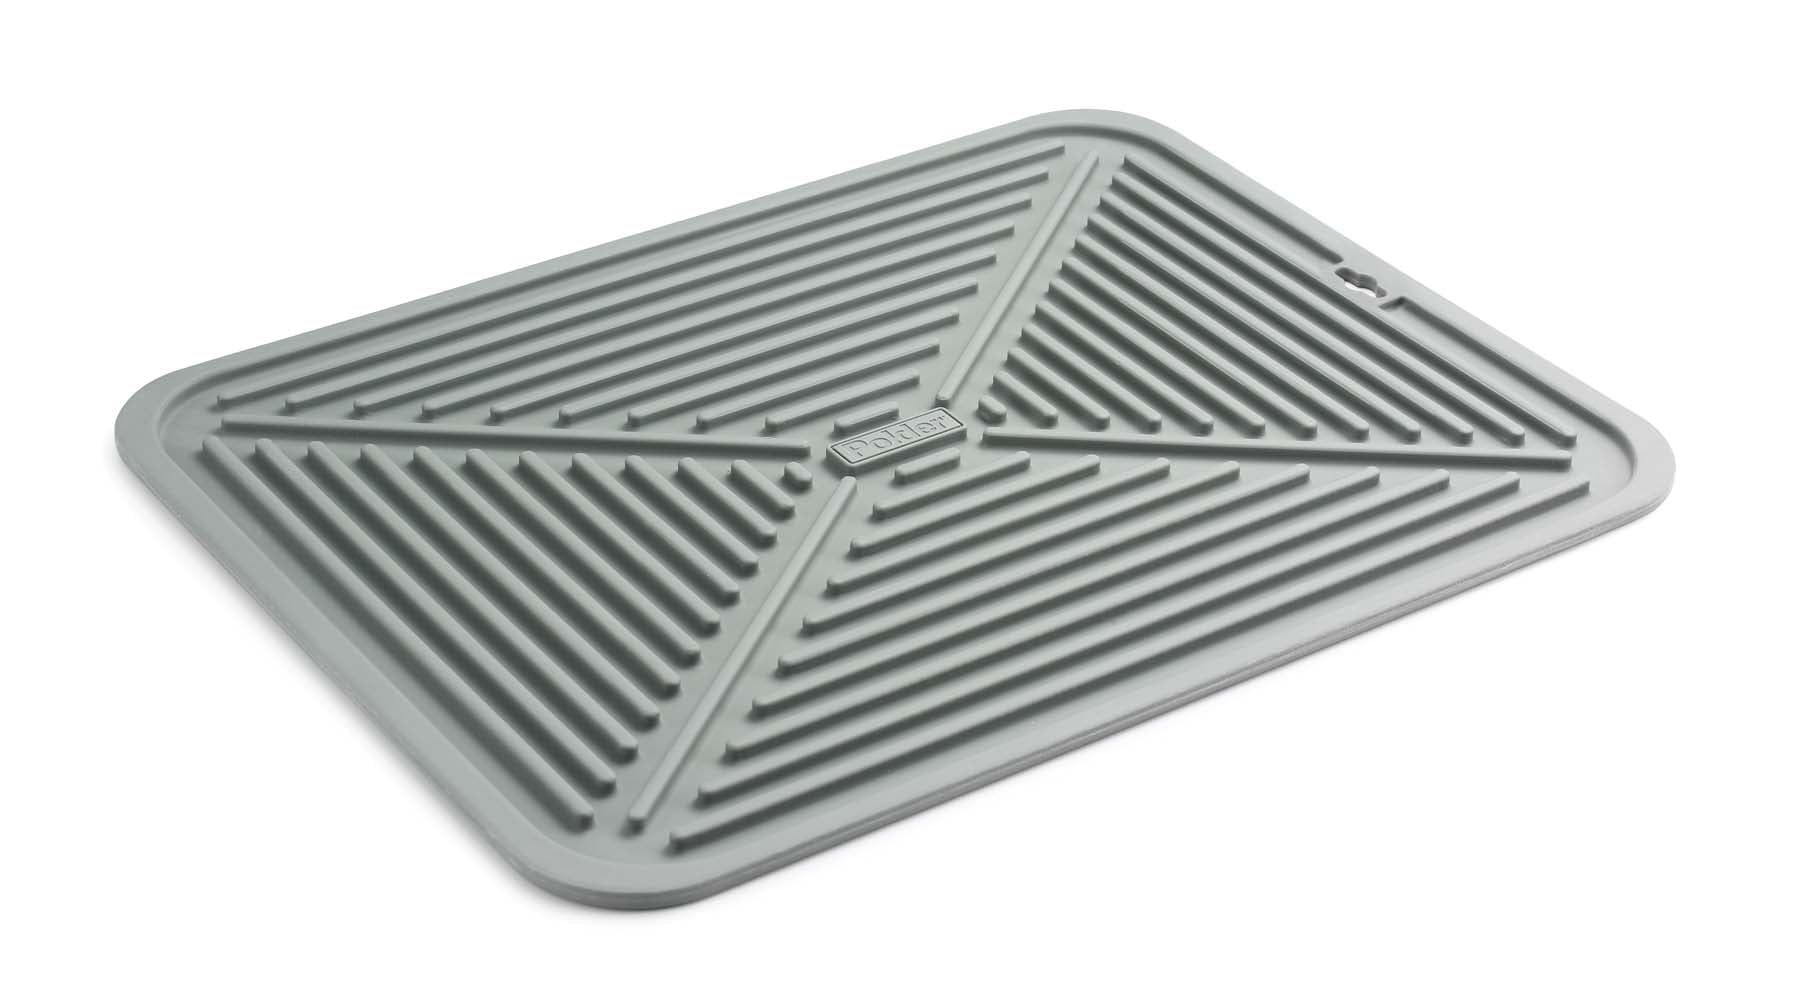 Polder 22 in. L x 15 in. W Gray Microfiber Drying Mat with Tray